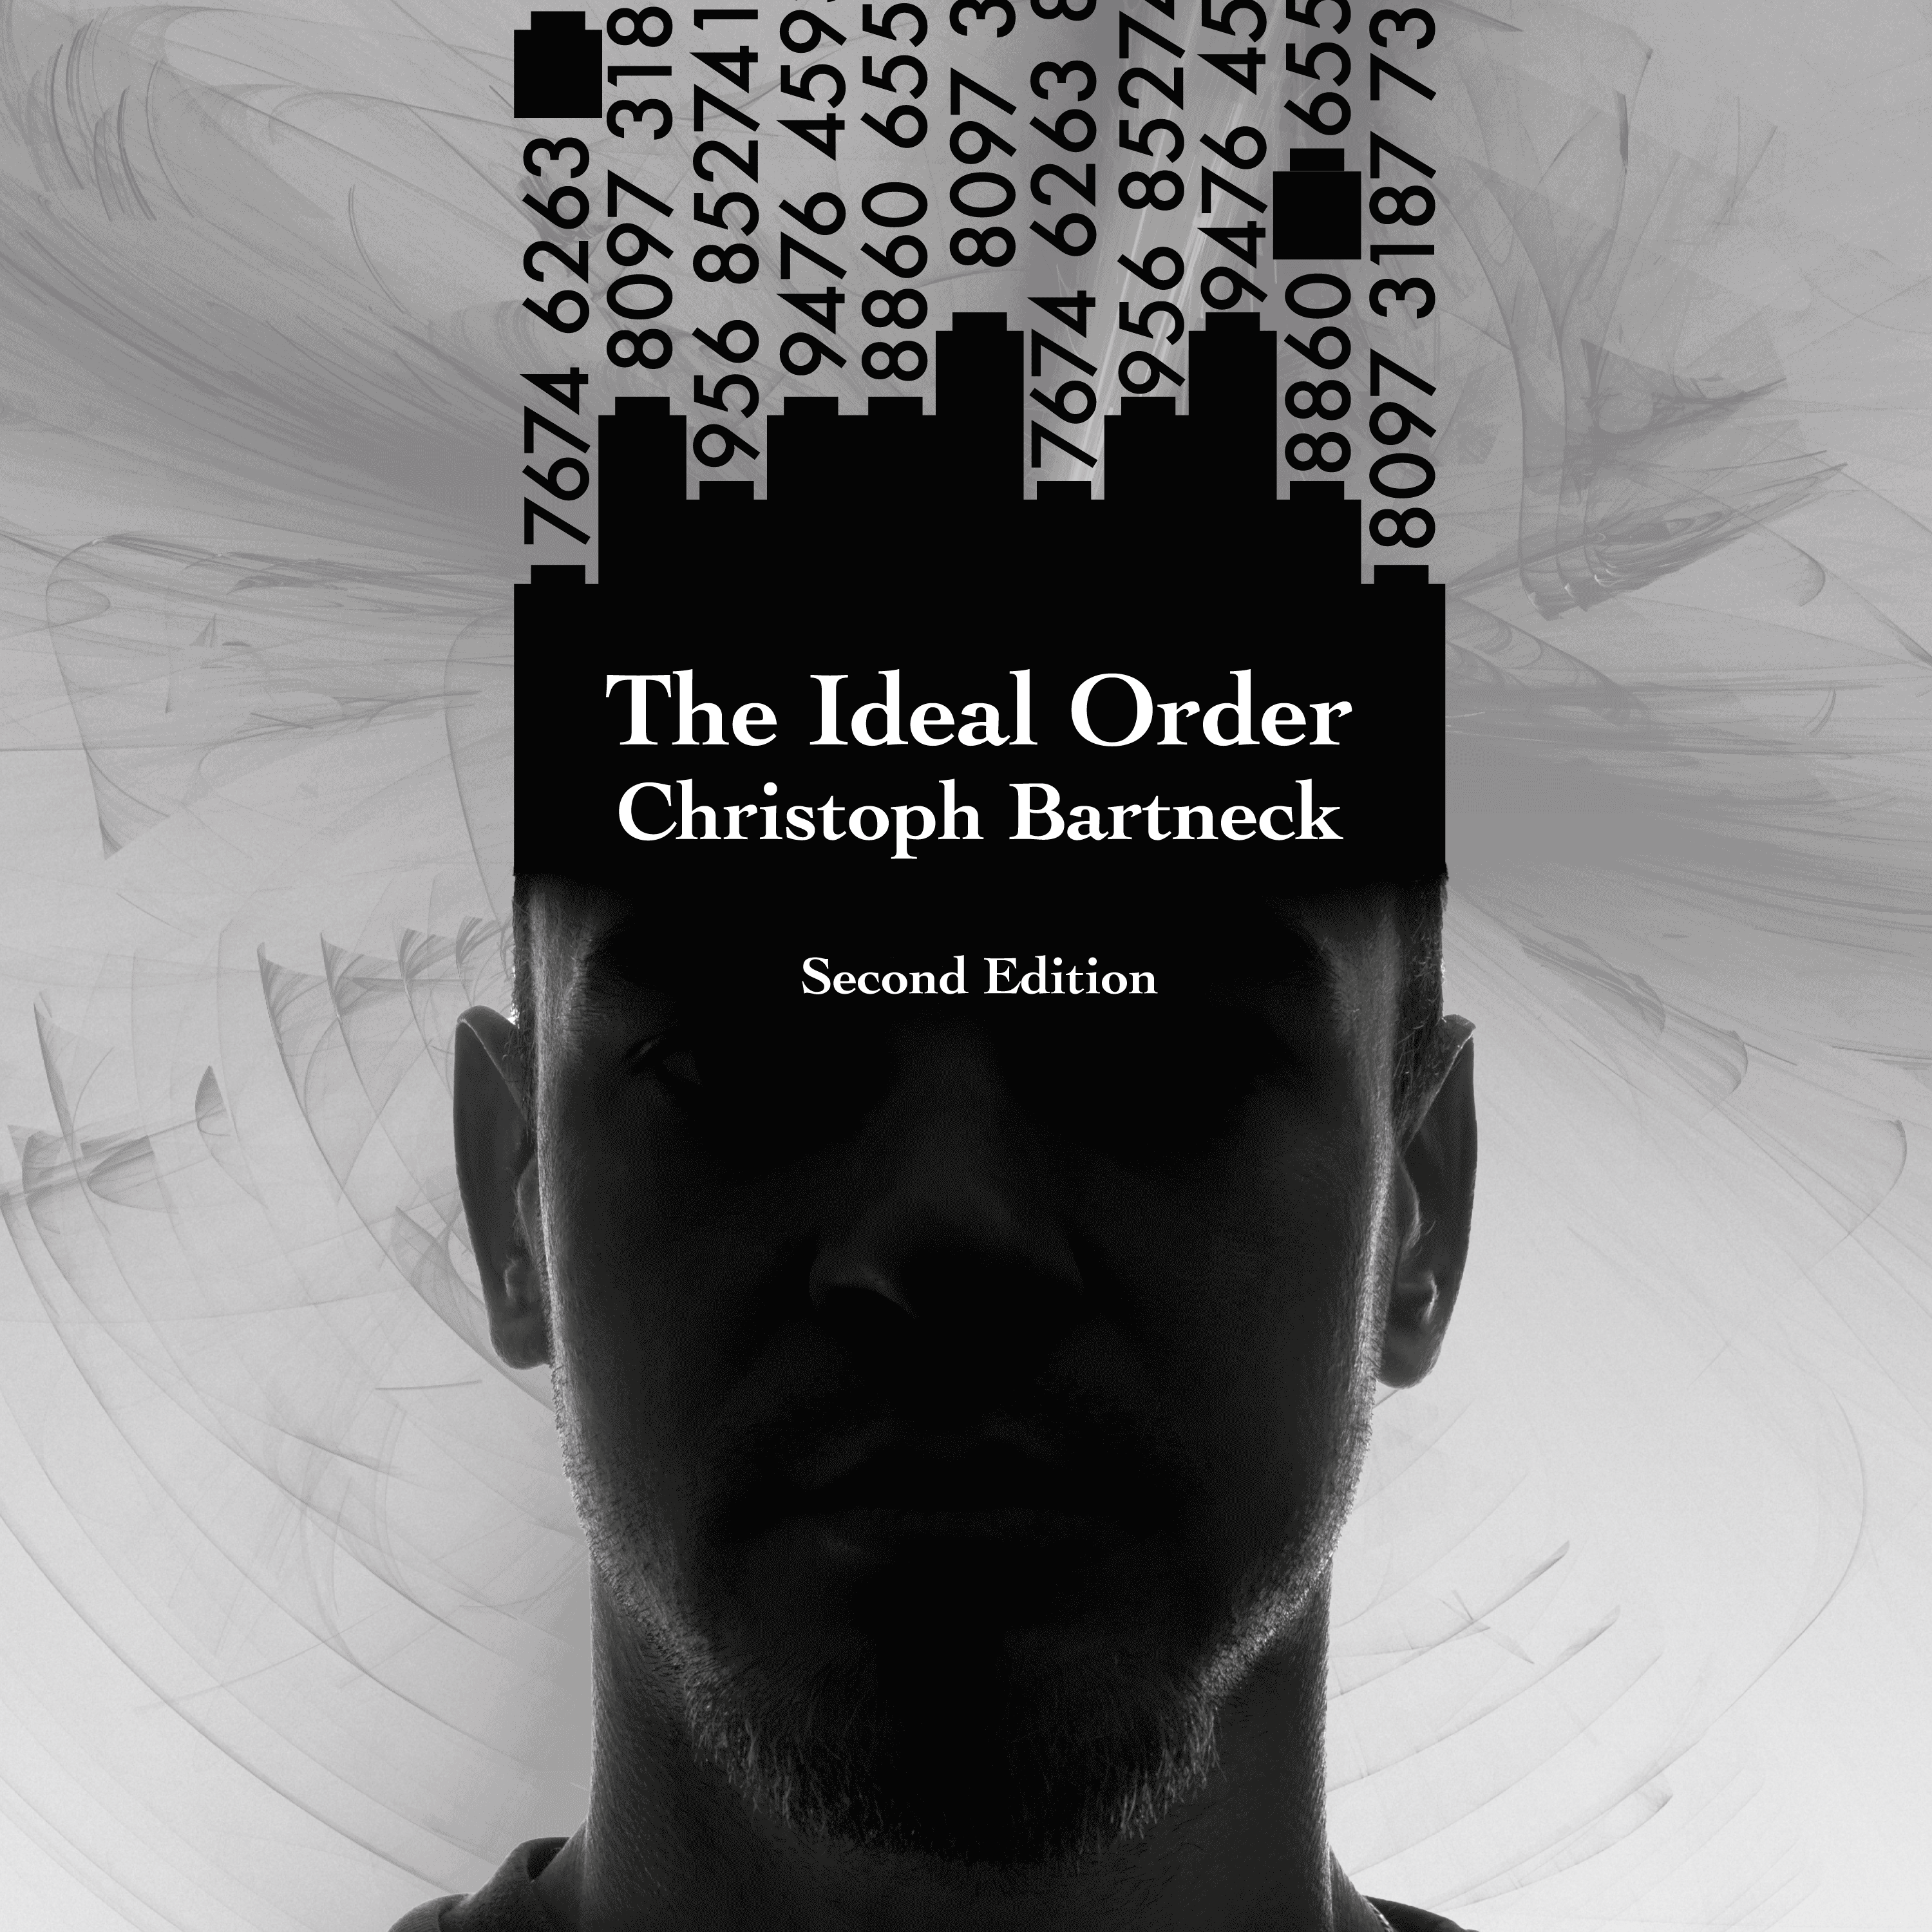 The Ideal Order